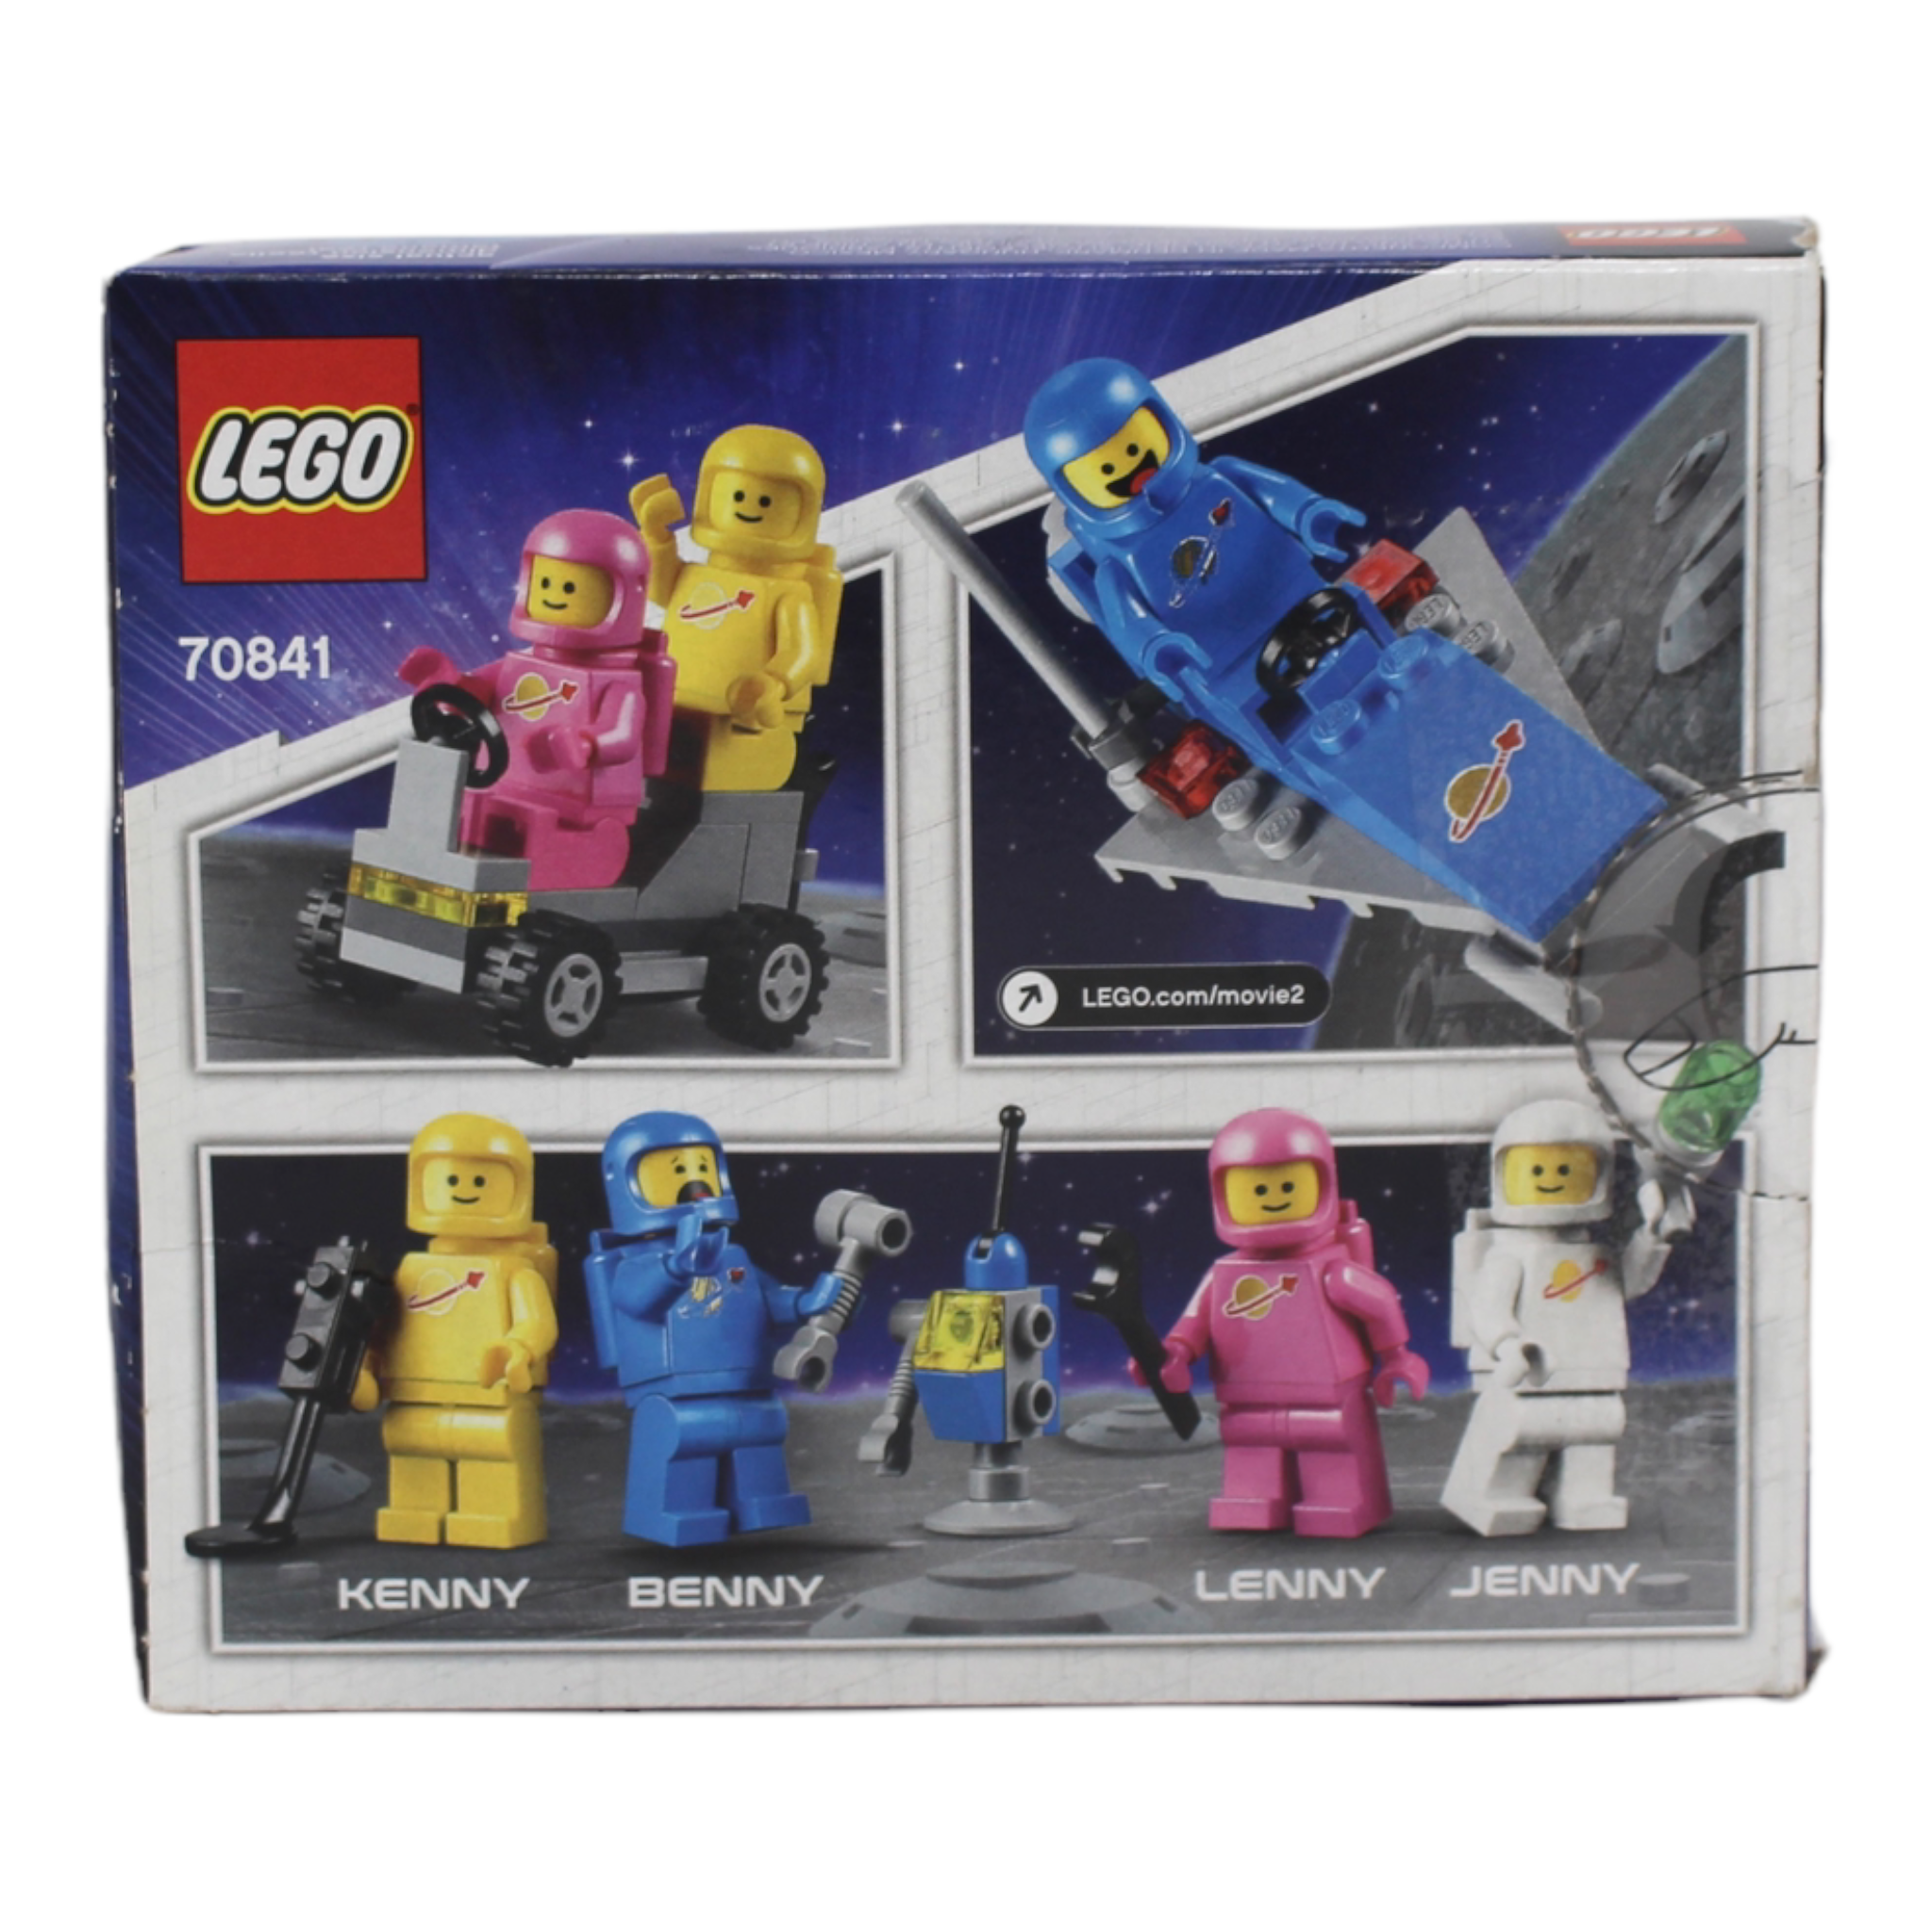 Certified Used Set 70841 The LEGO Movie 2 Benny’s Space Squad